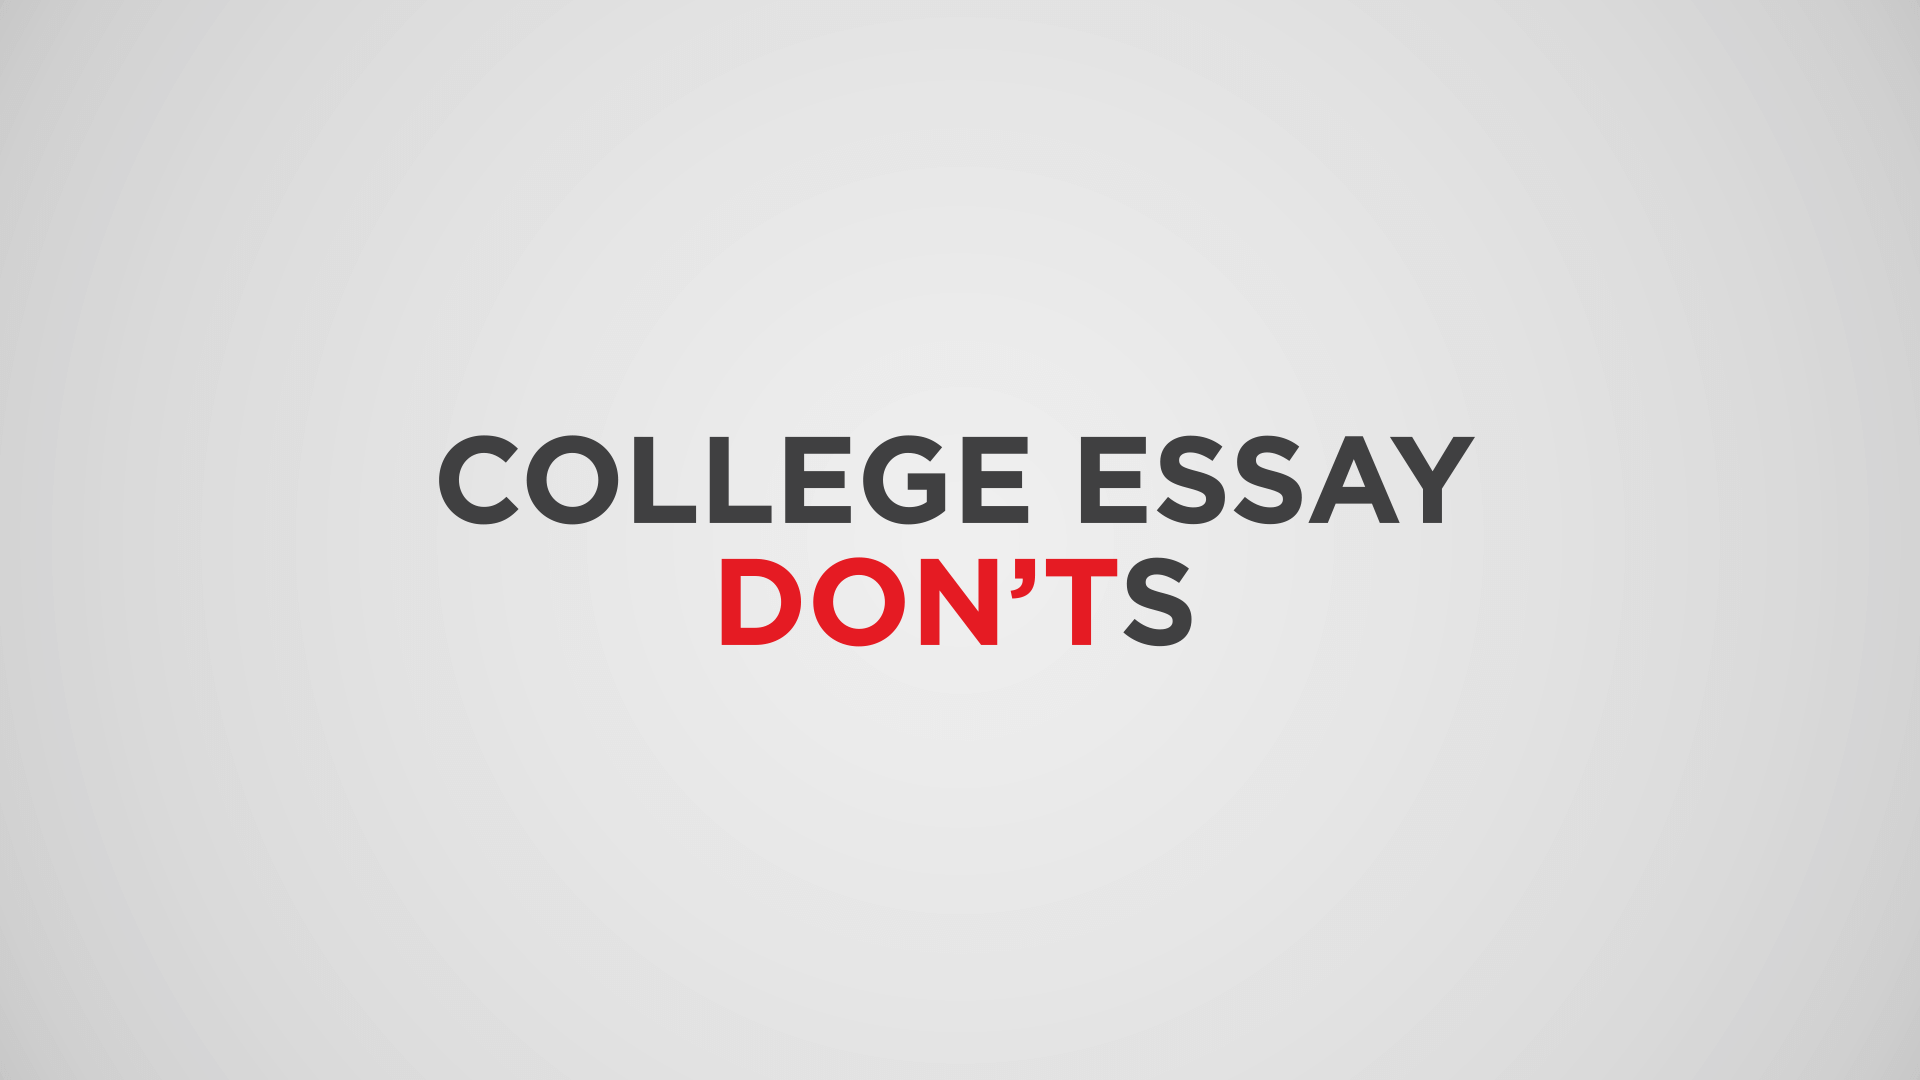 10 Things You Should NEVER Write in Your College Essay